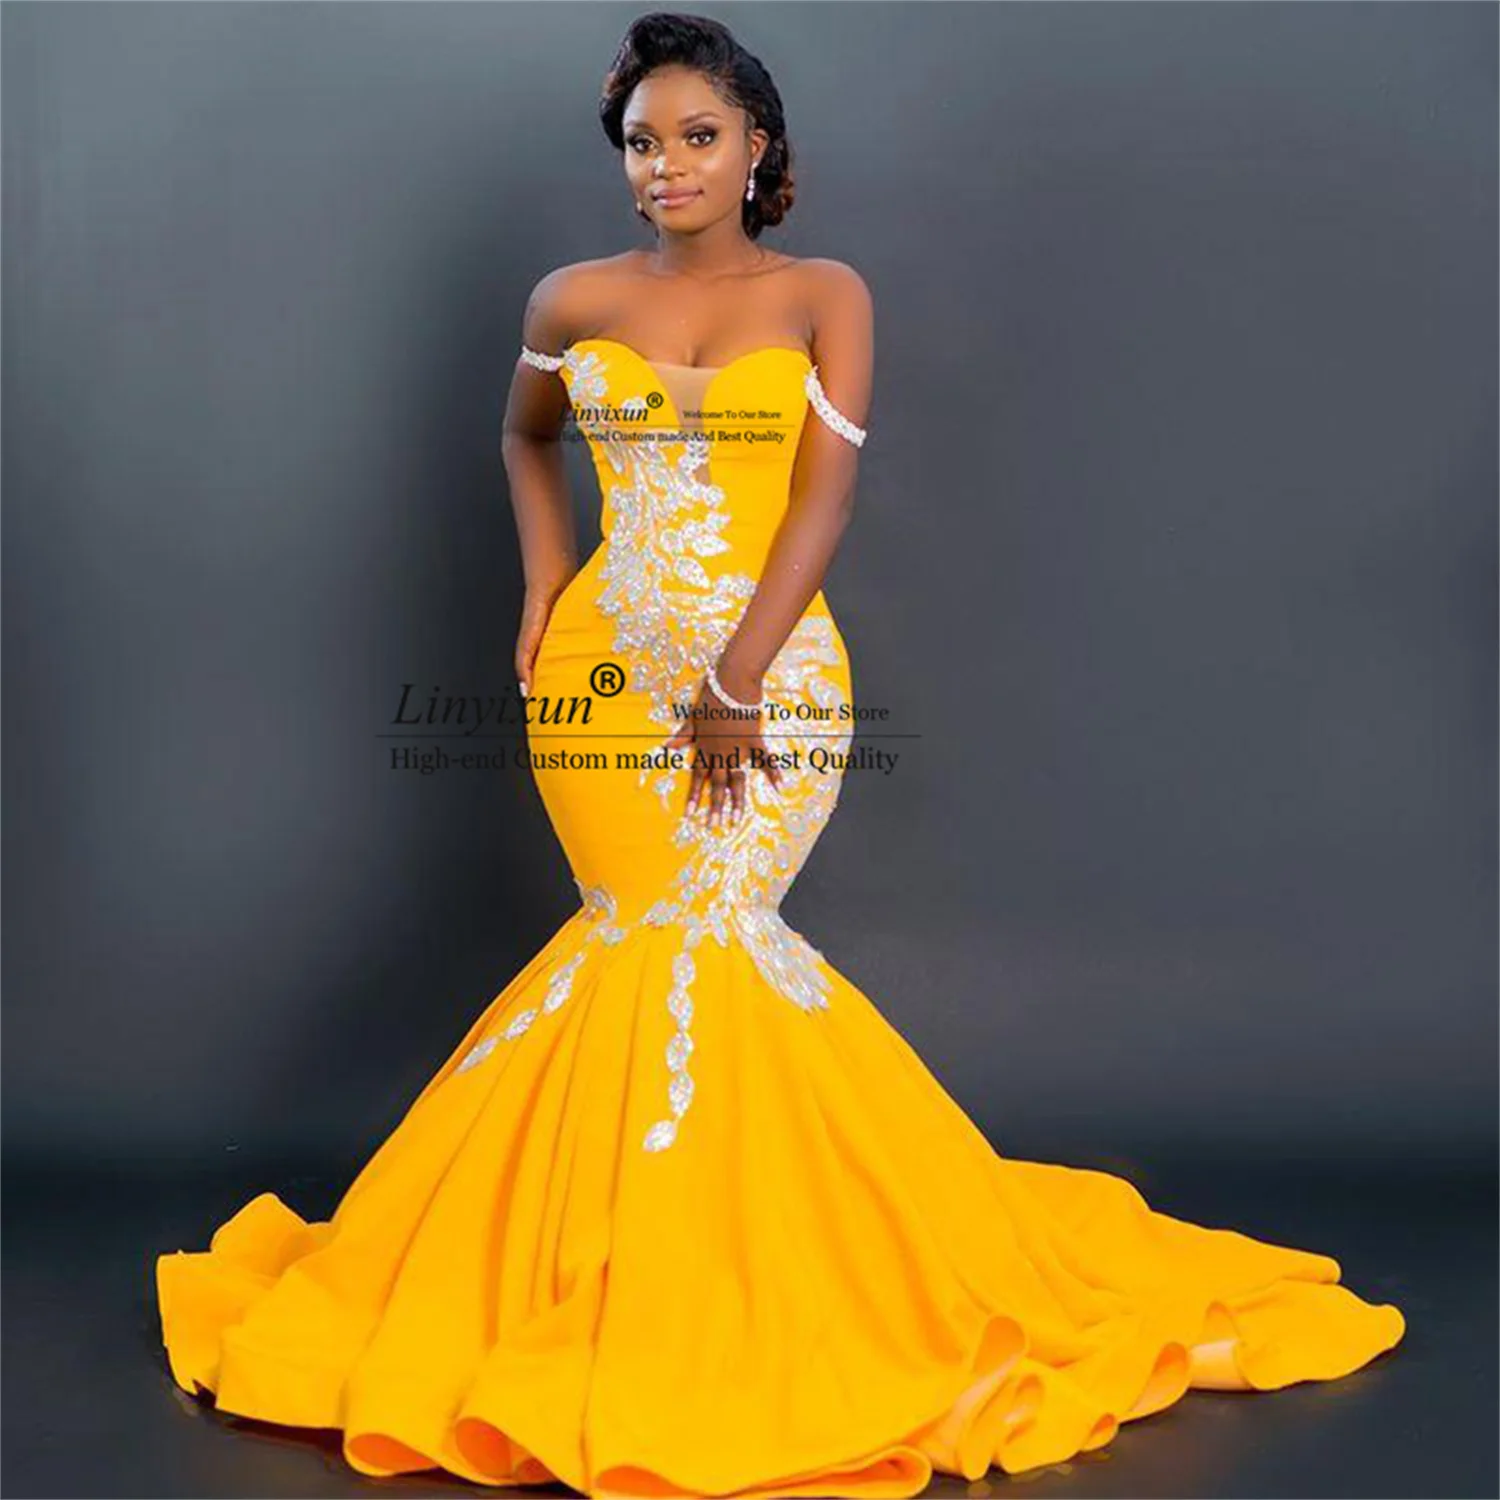 Sexy Gold Mermaid Prom Dresses With Sequined Lace Appliques Aso Ebi Evening Dress 2022 Court Train Formal Women Party Dress plus size prom & dance dresses Prom Dresses